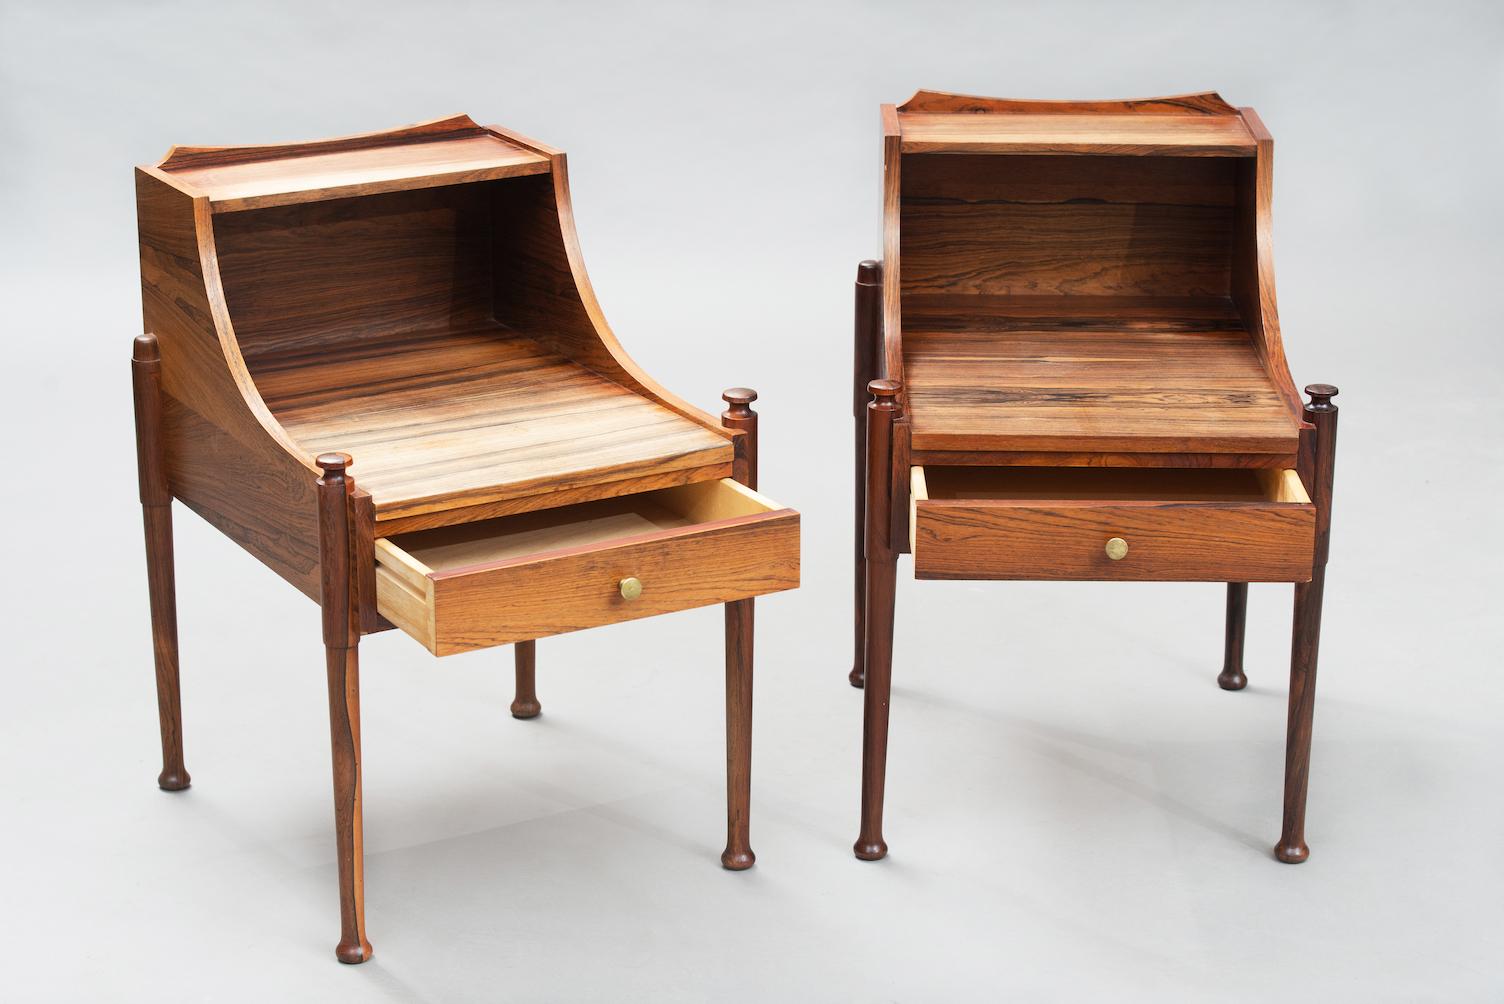 Danish Mid-Century Modern sculptural rosewood bedside tables.
This items are in original condition, can be sold as they are or fully restored, the price shown is in original condition.
 